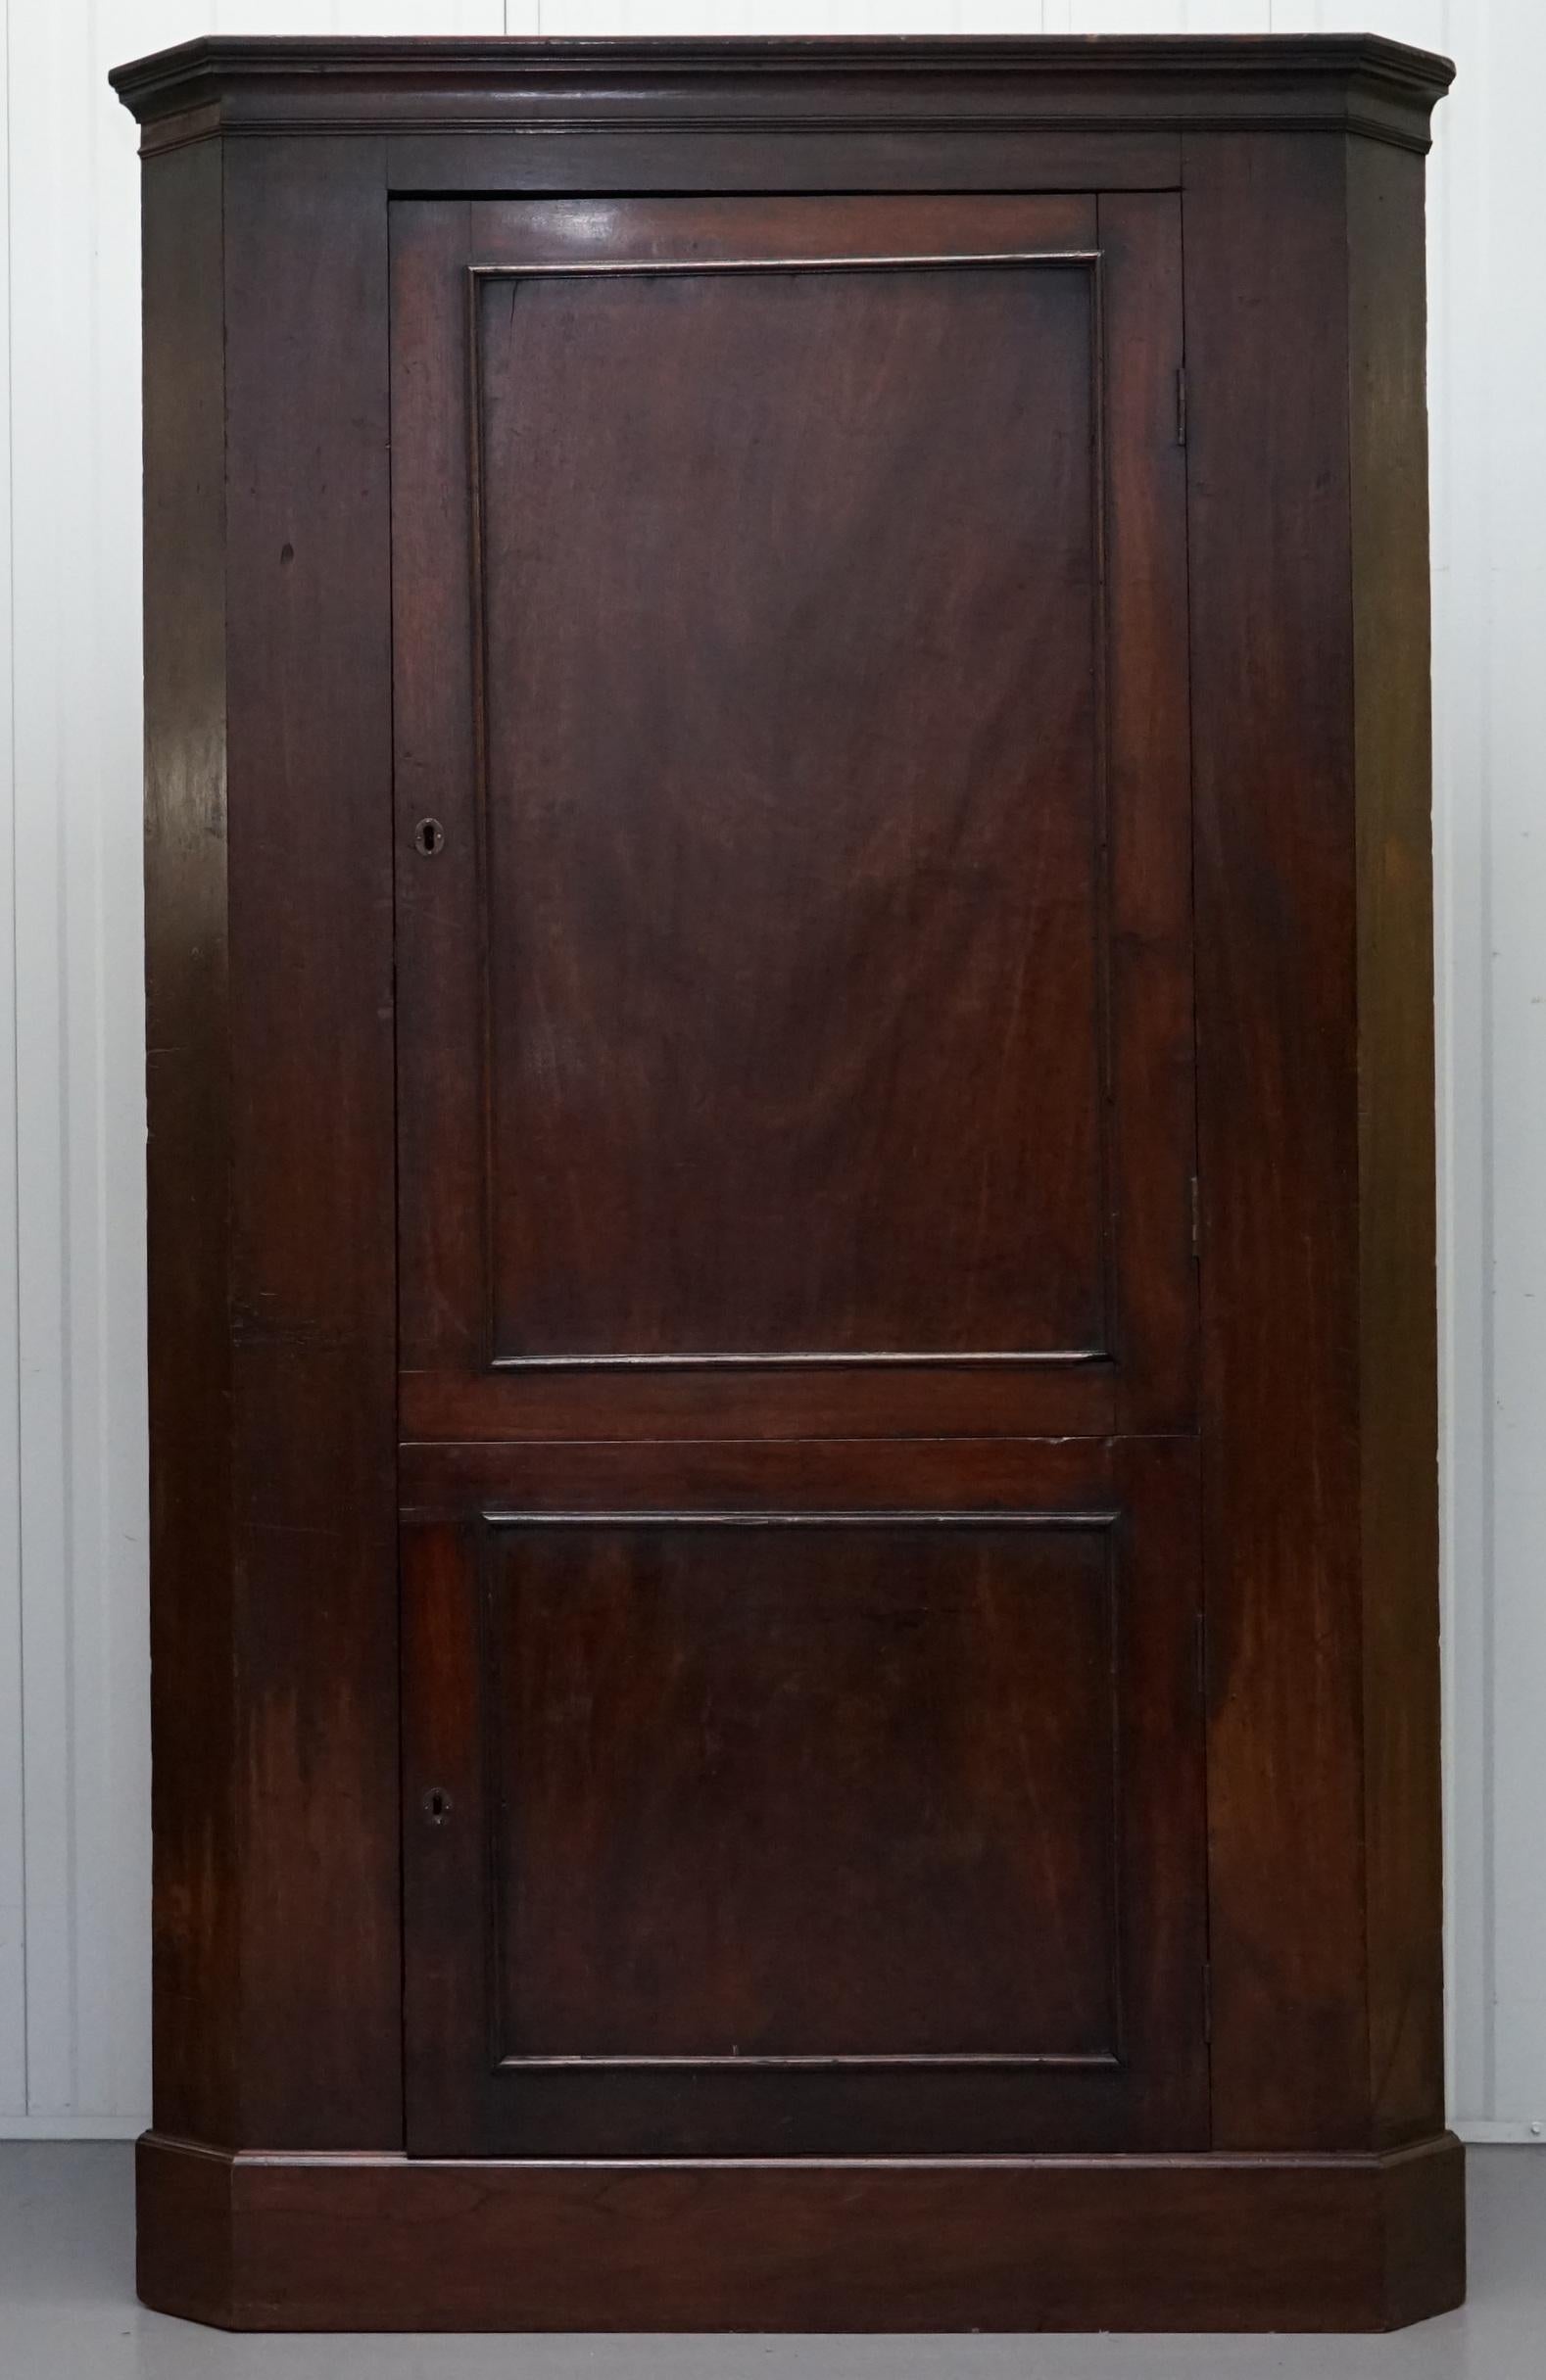 We are delighted to offer for sale this lovely original George III circa 1760 solid mahogany corner cupboard 

A very good looking and decorative piece, its hard to believe that this has been in use for over 250 years, it’s a testament to how